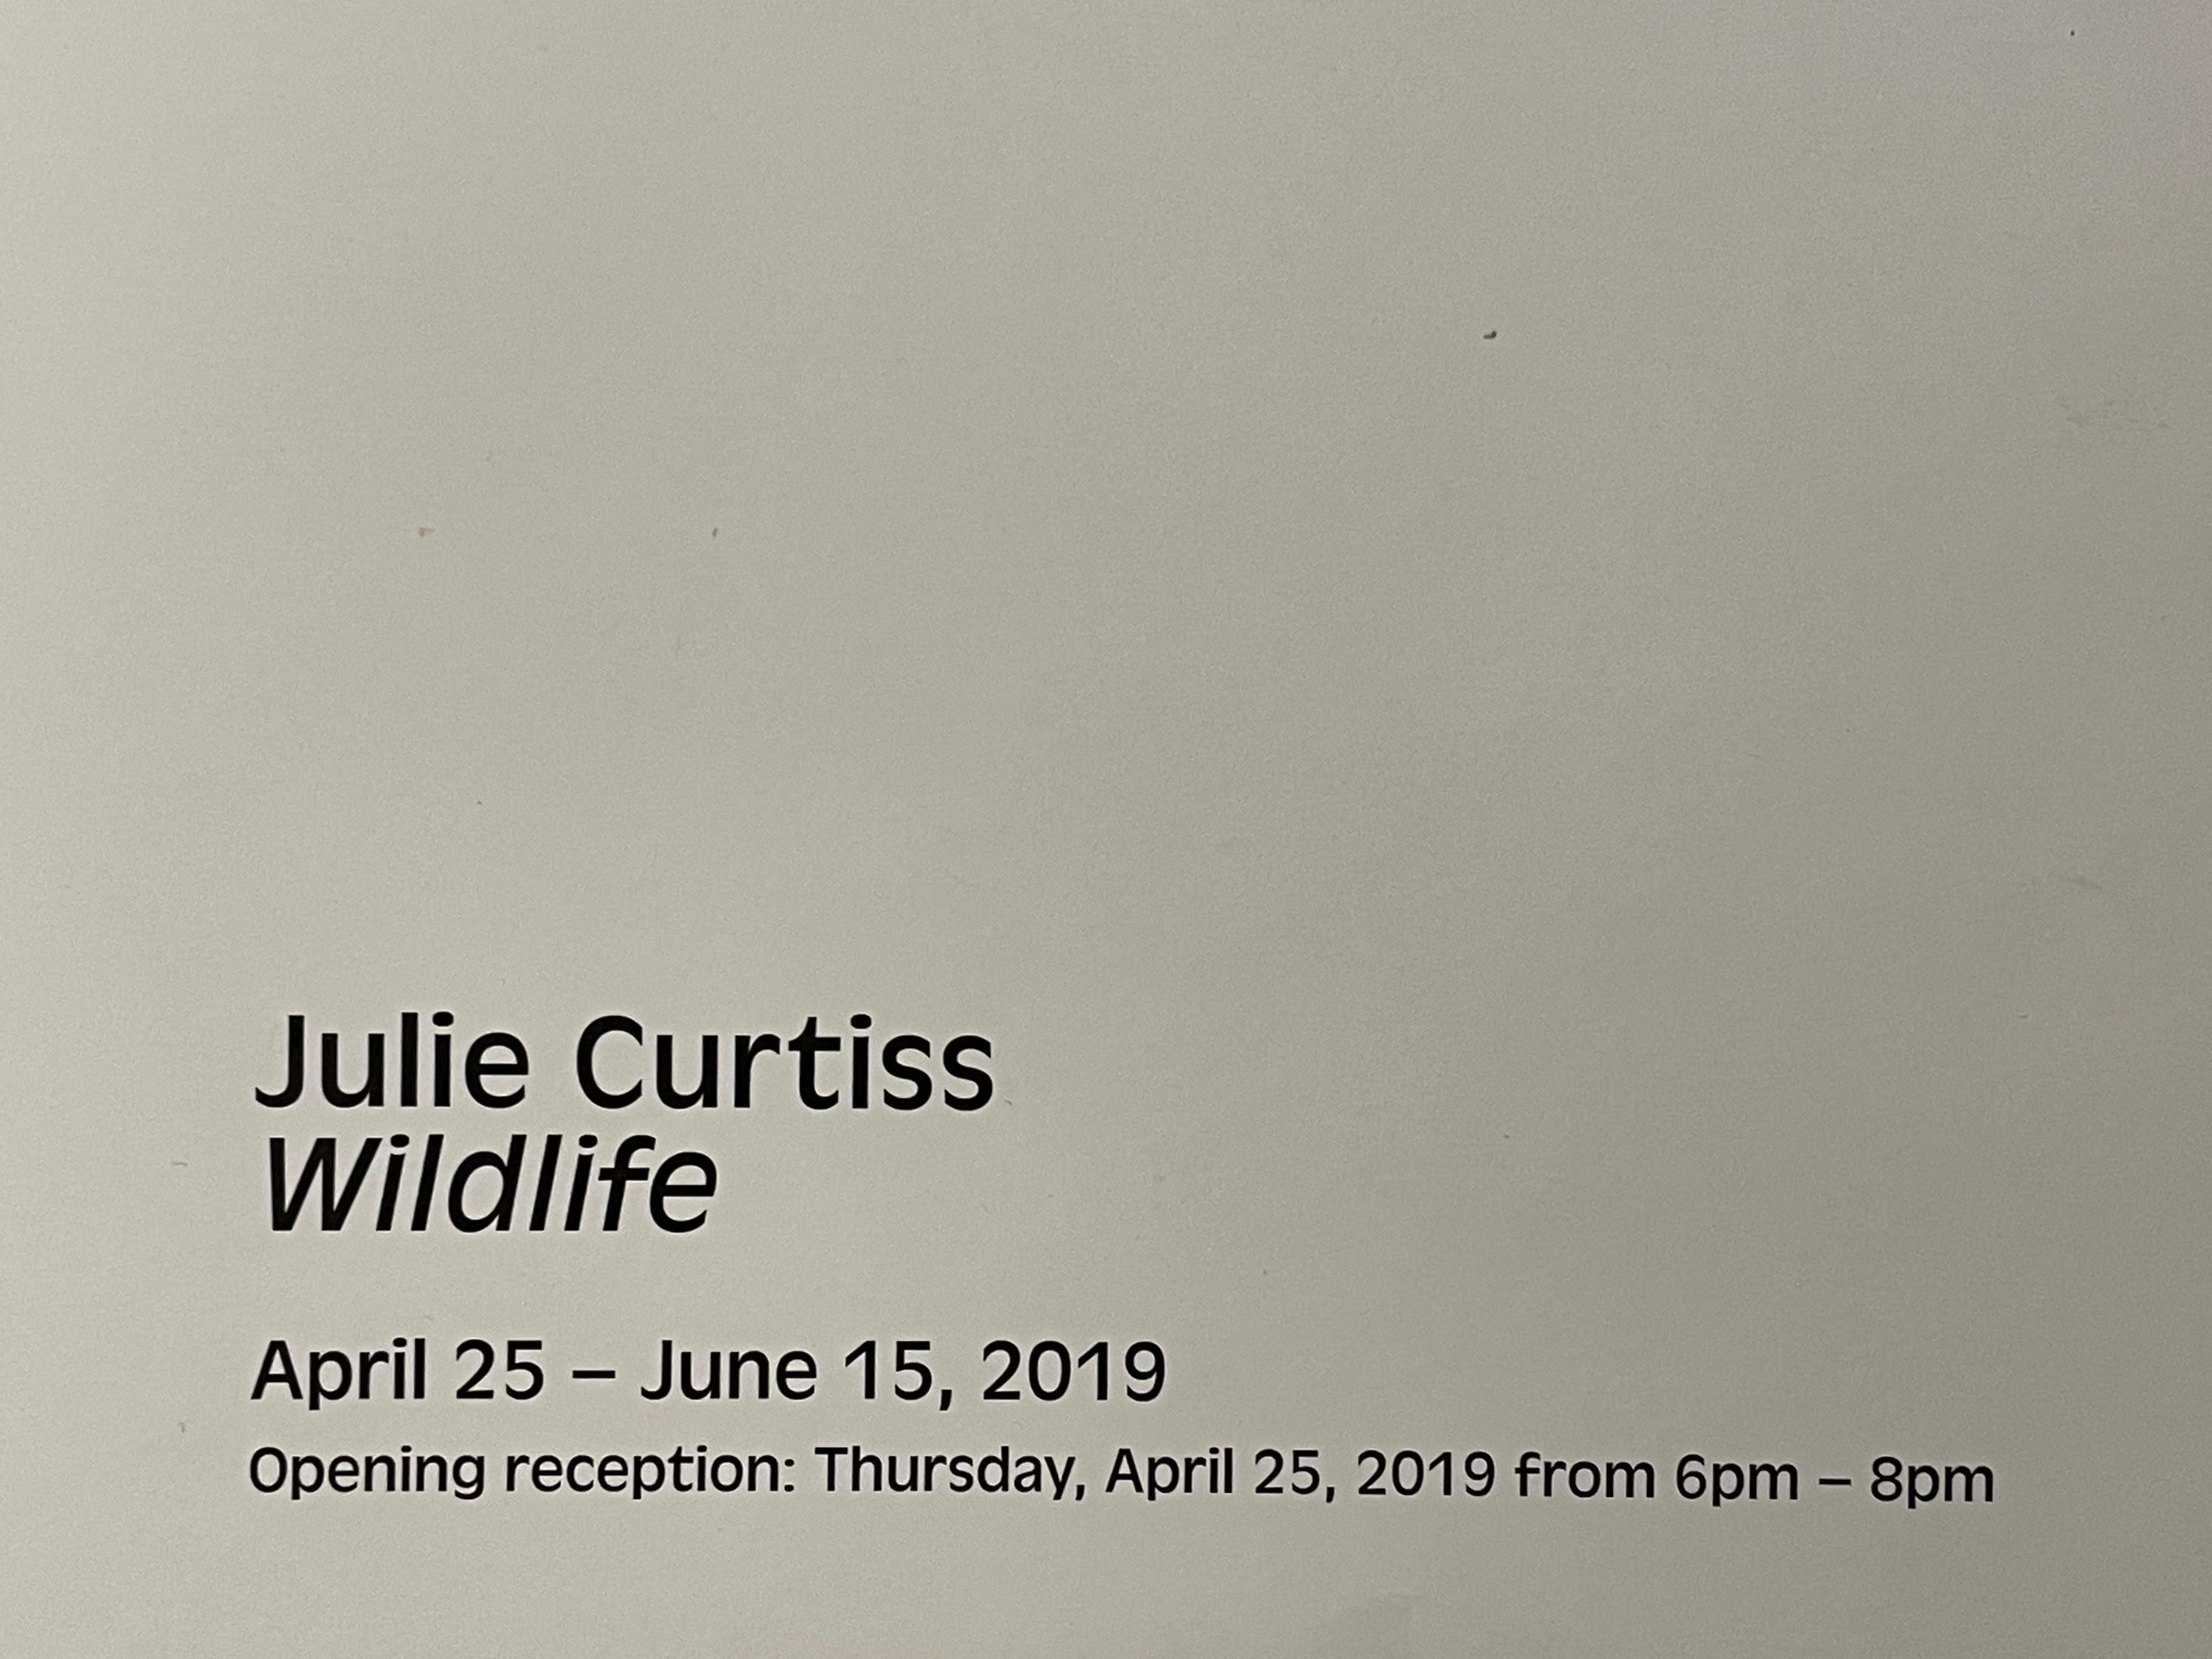 Title
Julie Curtiss Woman In High Heels Small Edition Of Only 10 - 17 X 11 Pristine Condition
Year
2019
Classification
Limited edition
Medium Type
Print
Medium/Materials
Offset lithograph in colors on wove paper

Categories
Lithograph / Feminist Art